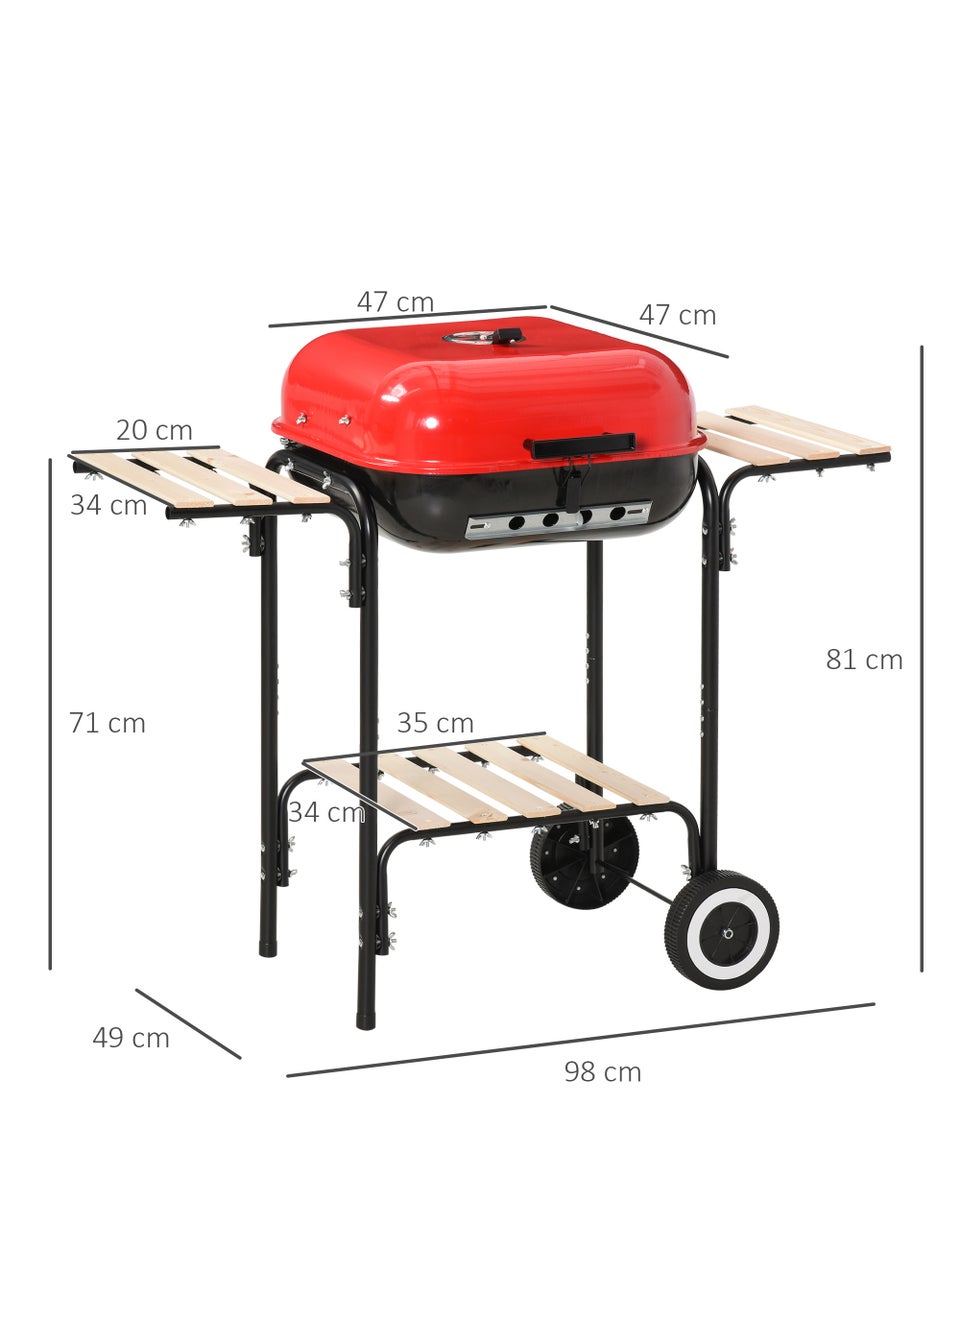 Outsunny Portable Steel Charcoal Barbecue Grill (98cm x 49cm x 81cm)